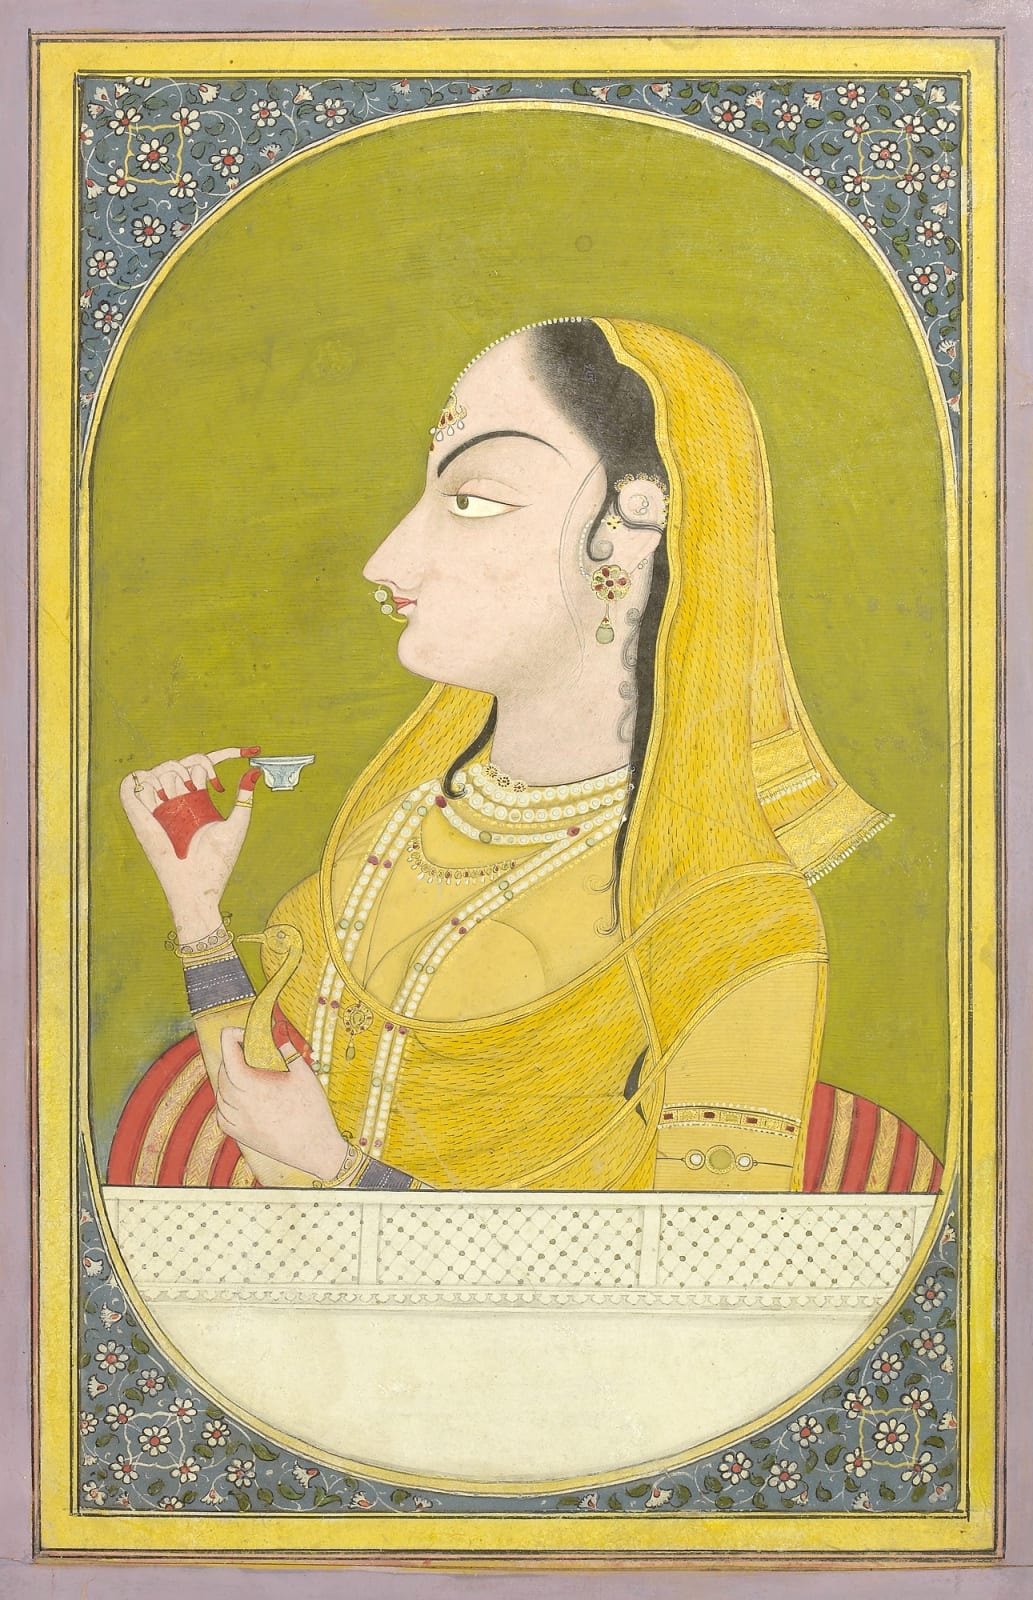 Lady holding a Wine Cup, By a Pahari artist working possibly in the Garhwal style, 1780-1800